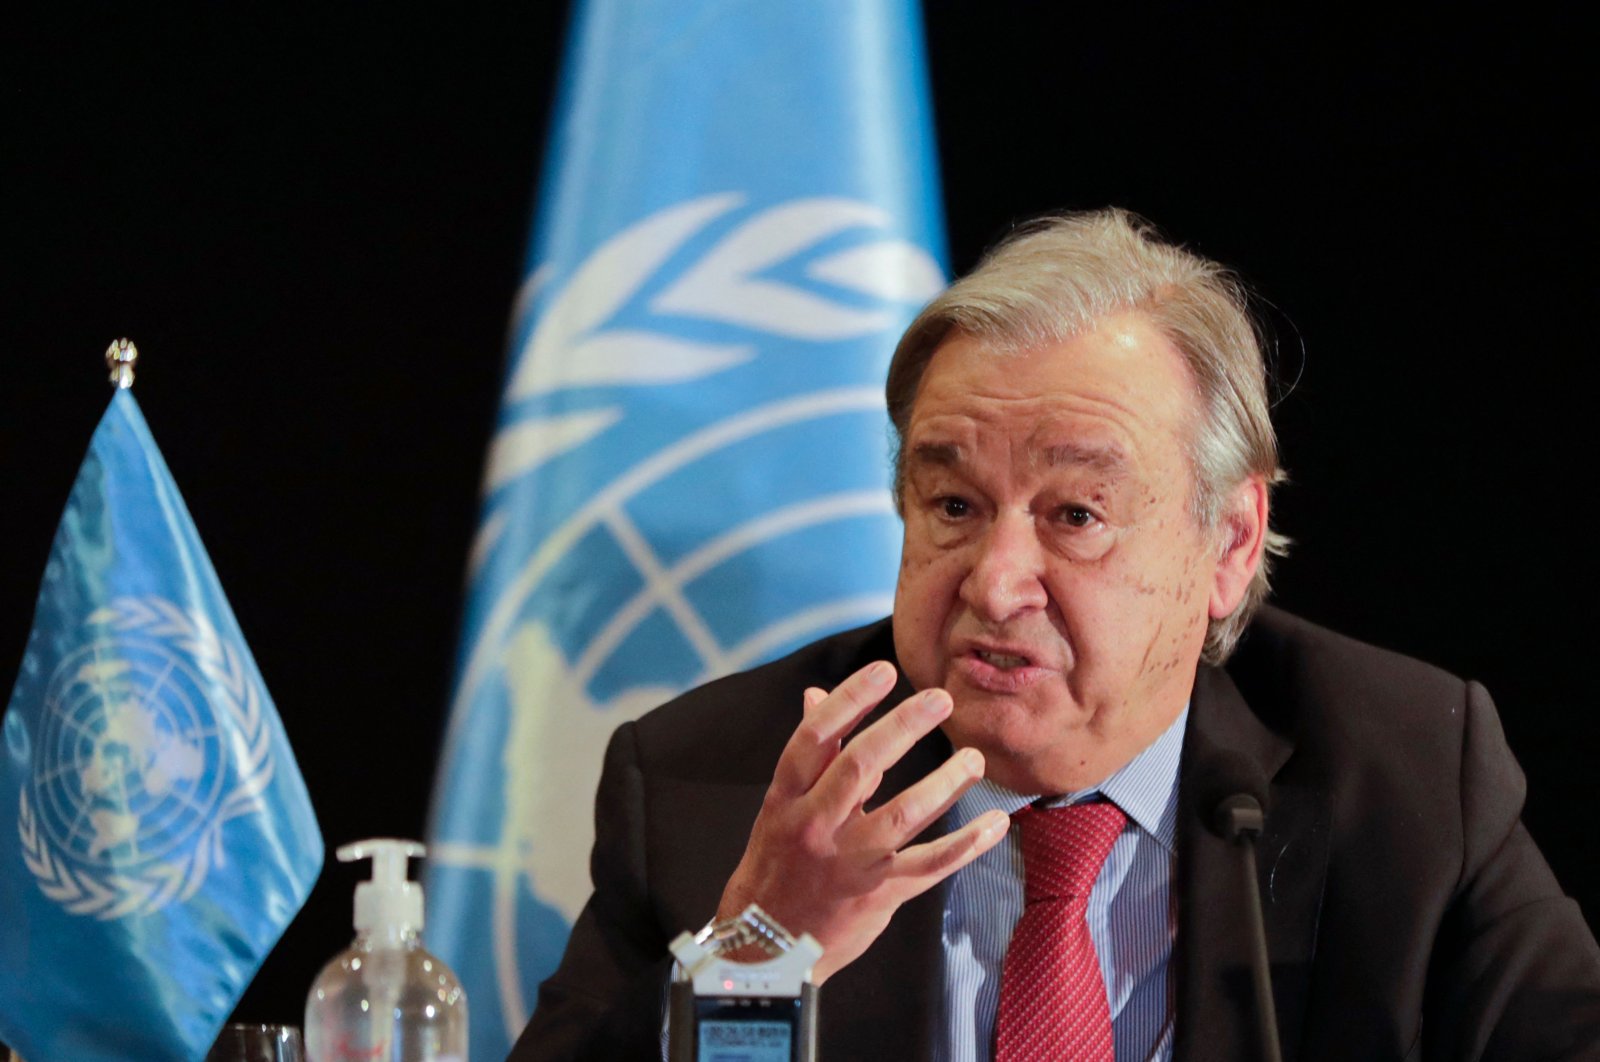 The UN chief calls for elections in Libya as soon as possible